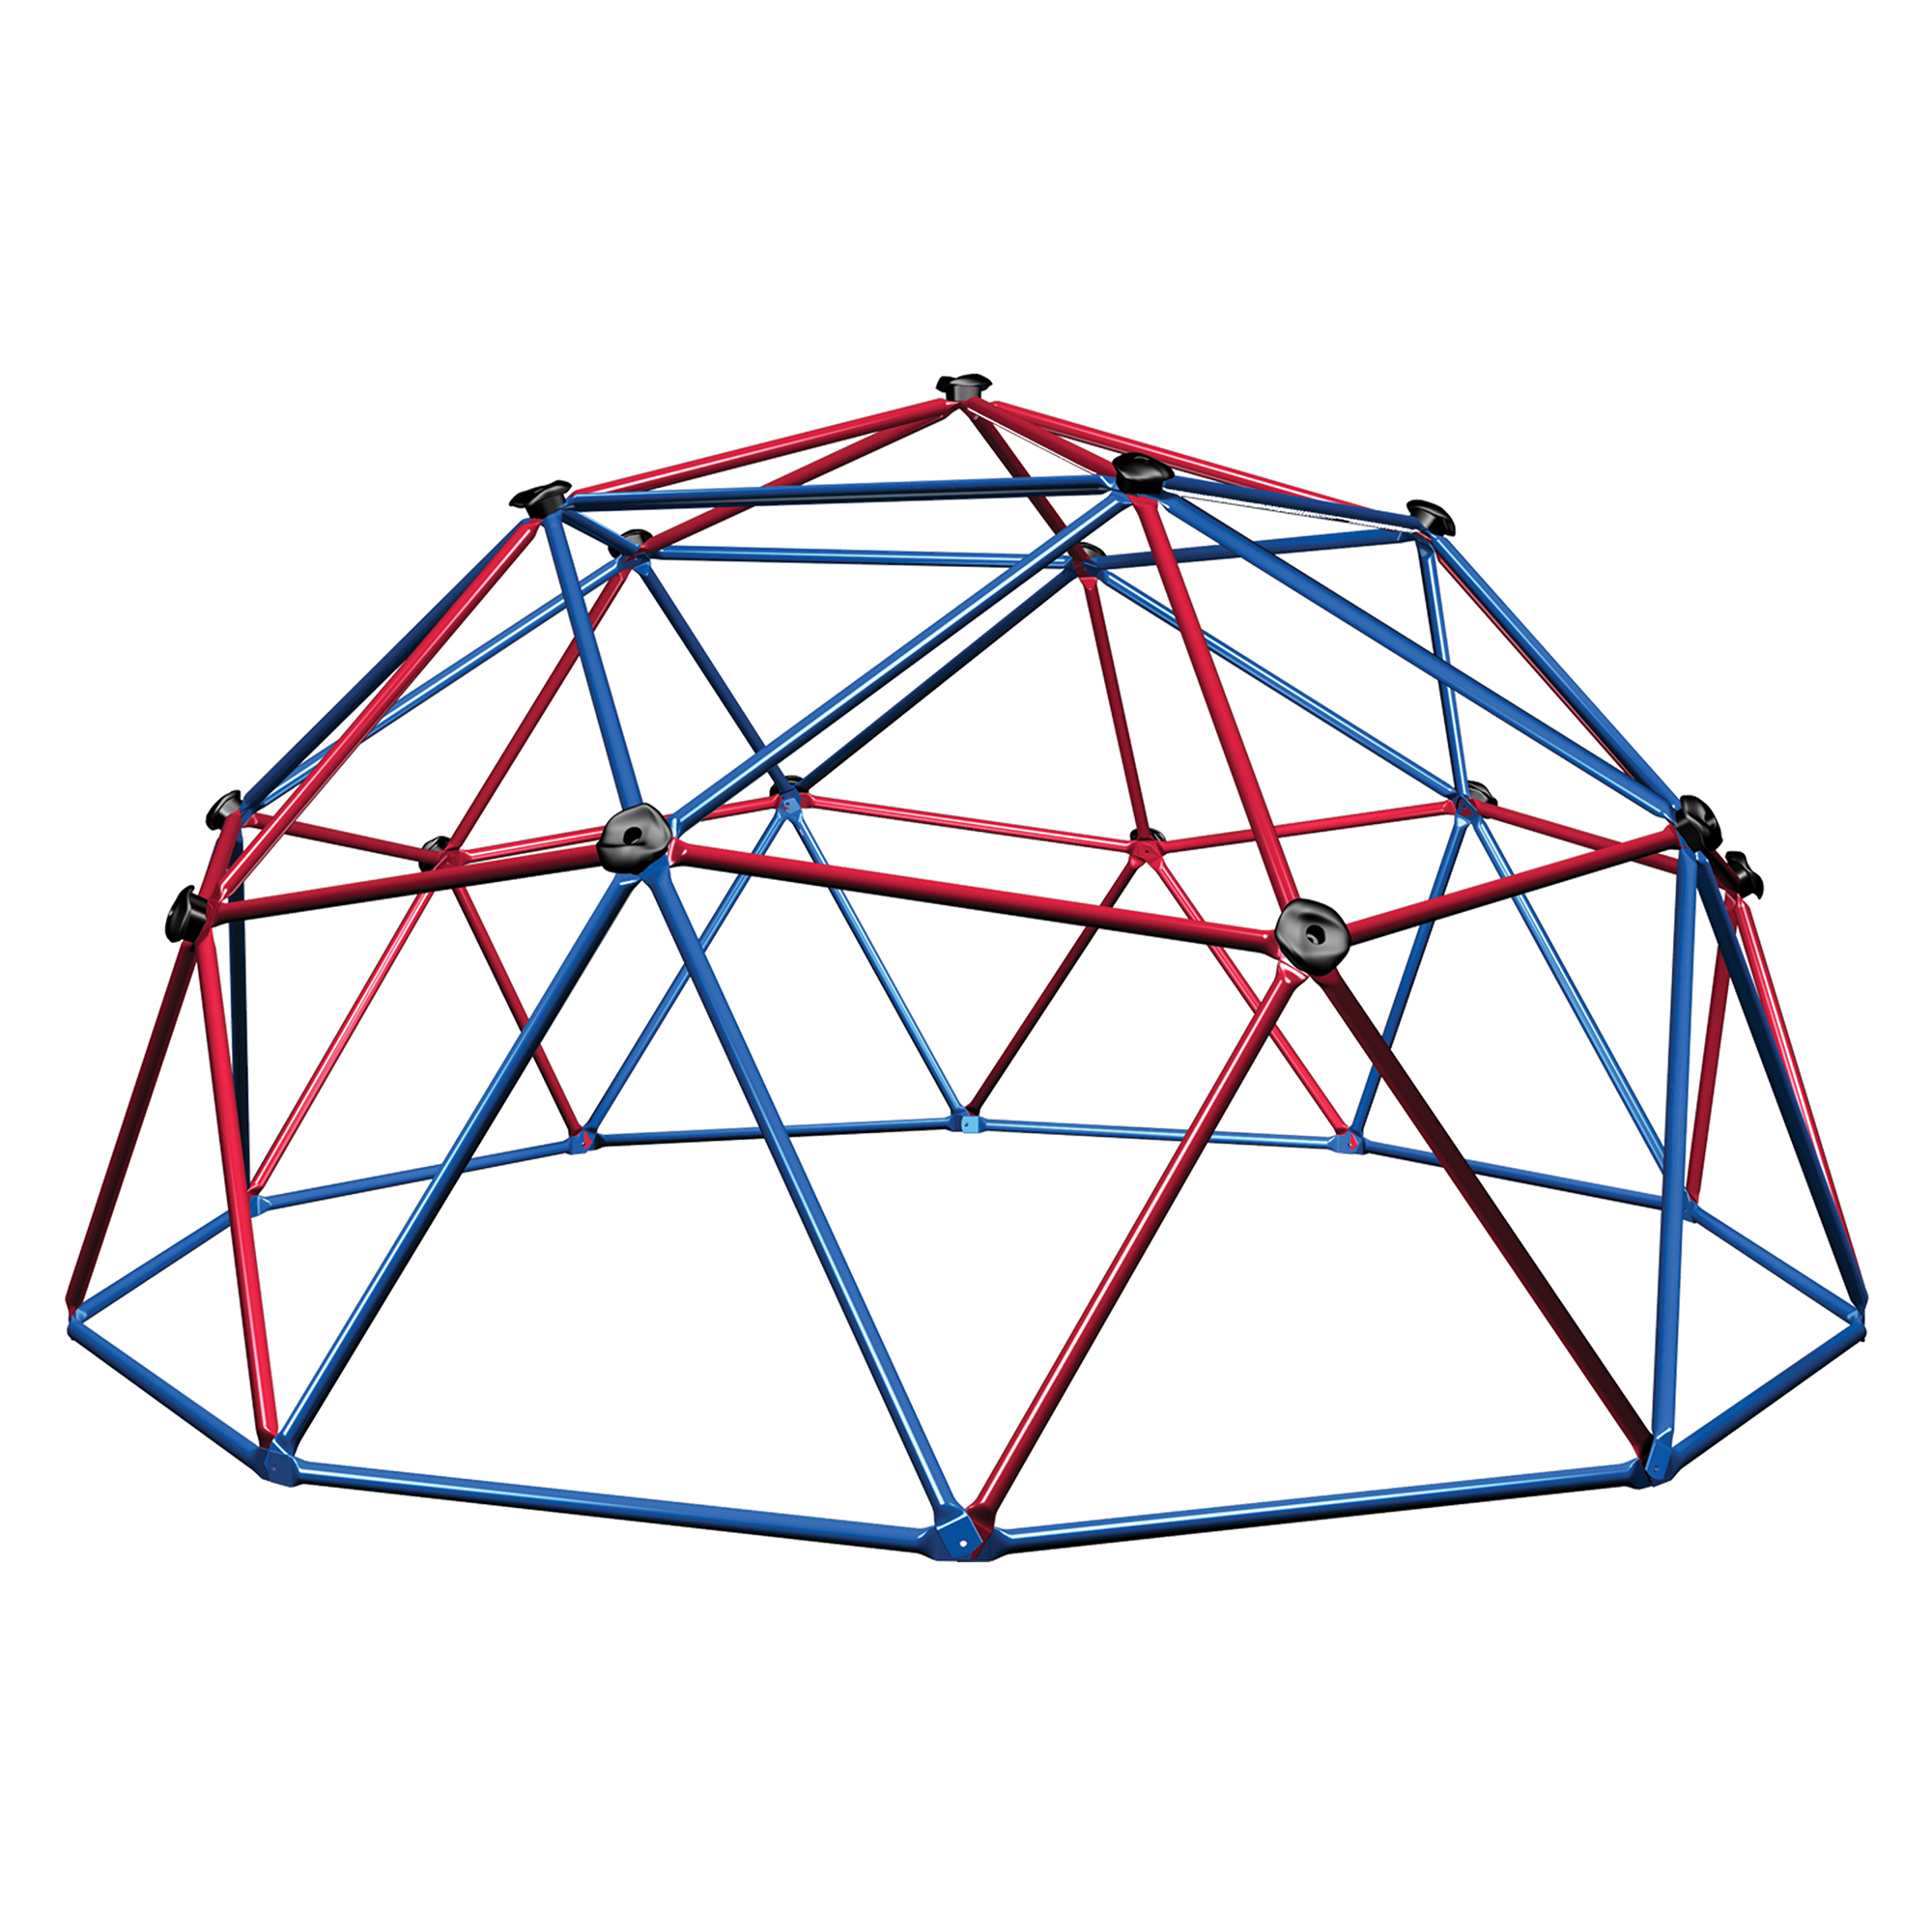 Lifetime Kid's Outdoor 5 ft. H x 10 ft. W Dome Climber, Red and Blue (101301) - image 1 of 11